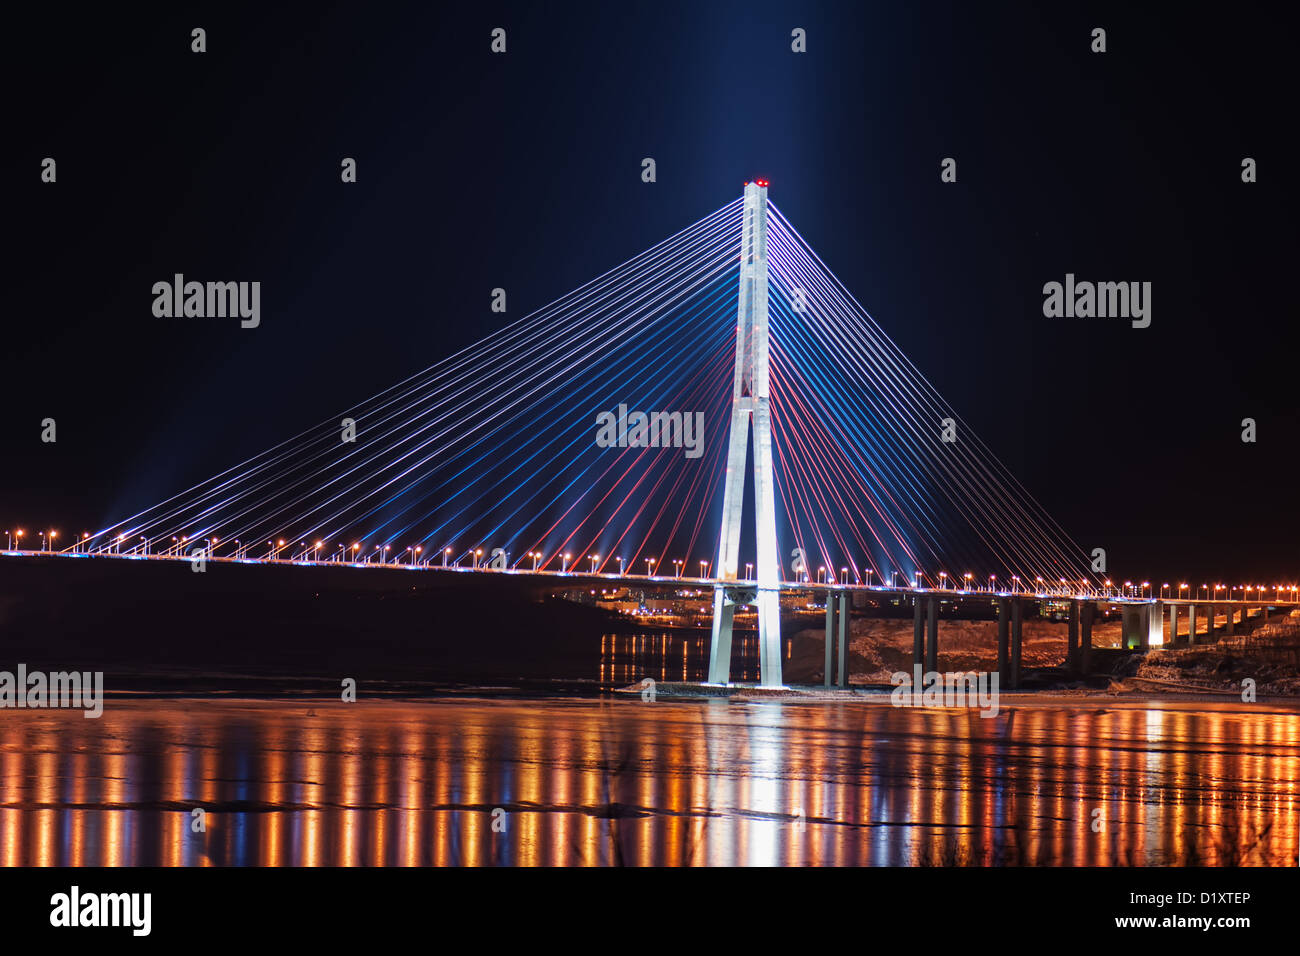 night view of the longest cable-stayed bridge in the world in the Russian Vladivostok over the Eastern Bosphorus strait Stock Photo